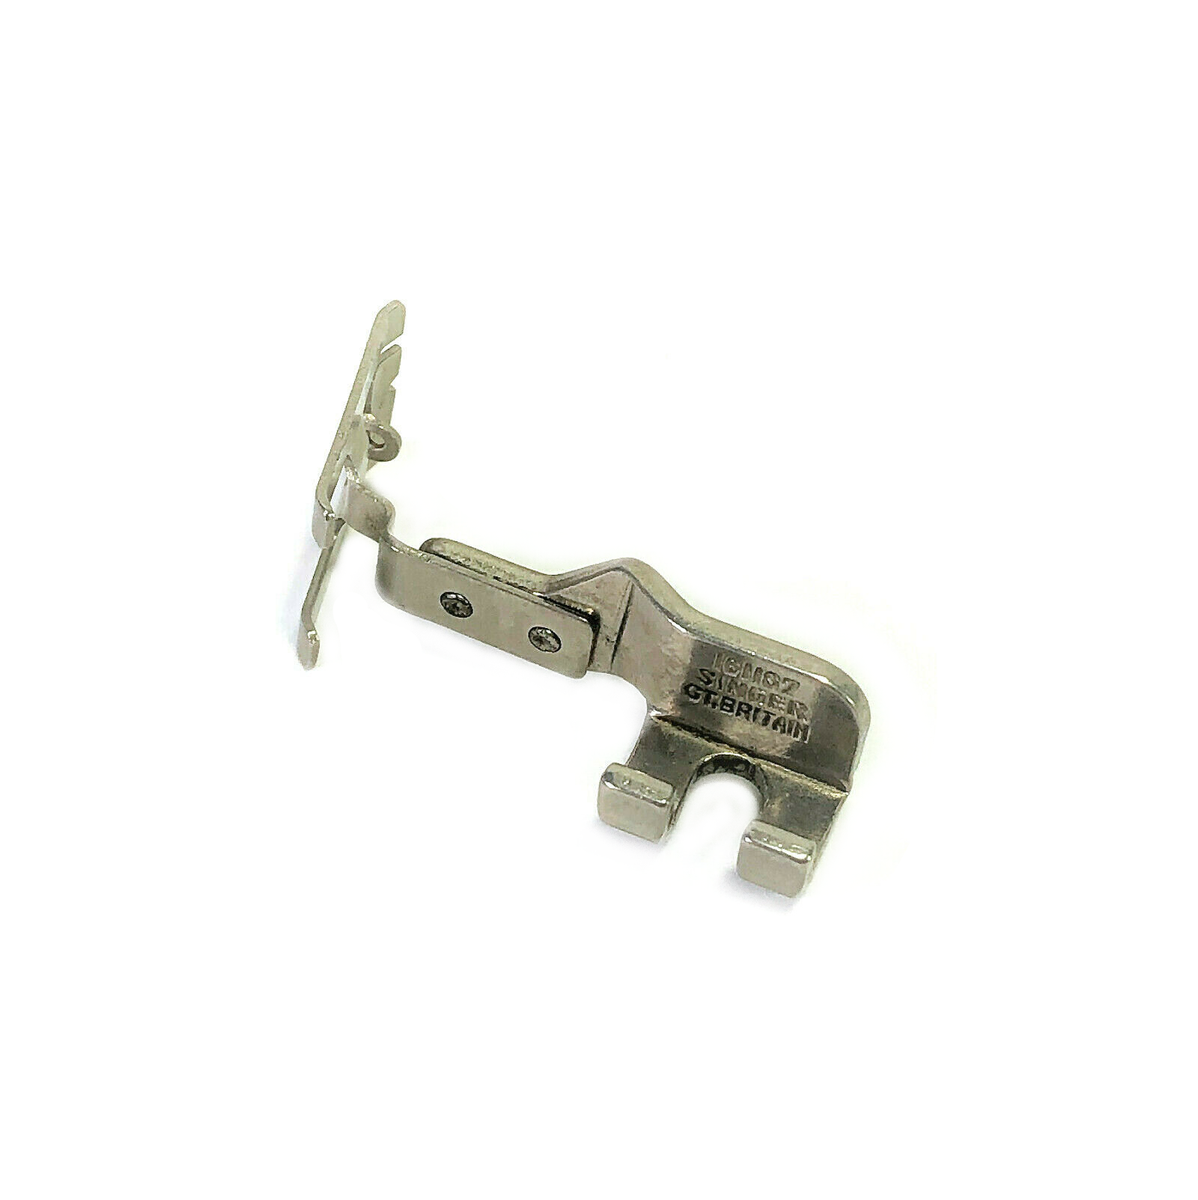  SINGER  All Purpose Presser Foot, Utility & Decorative  Stitches, Wide Needle Slot Up to 7mm Stitch Width - Sewing Made Easy